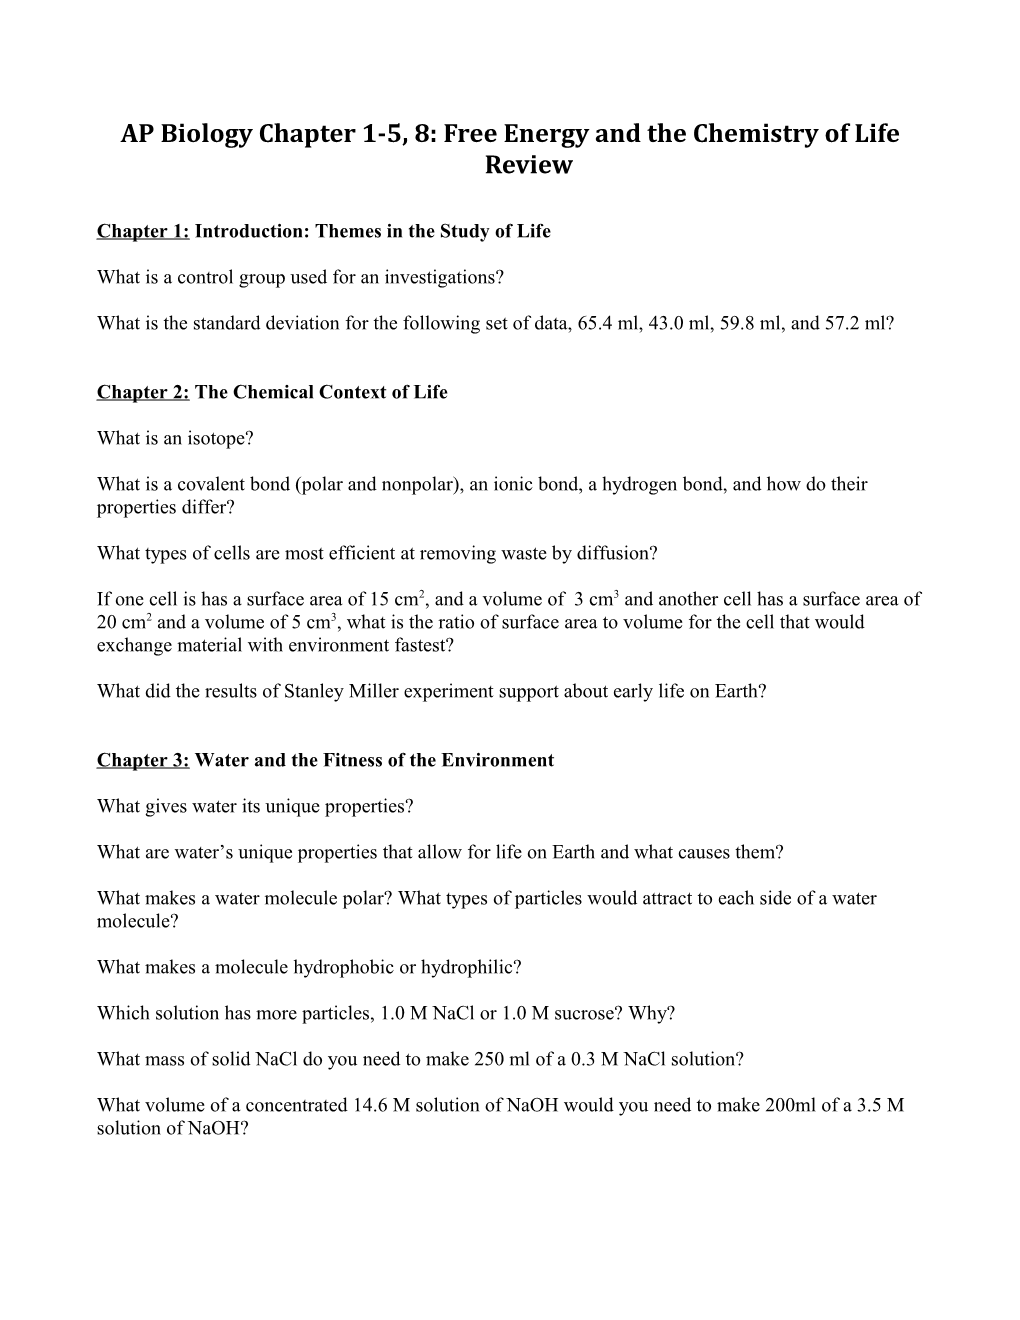 AP Biology Chapter 1-5: Chemistry of Life Review